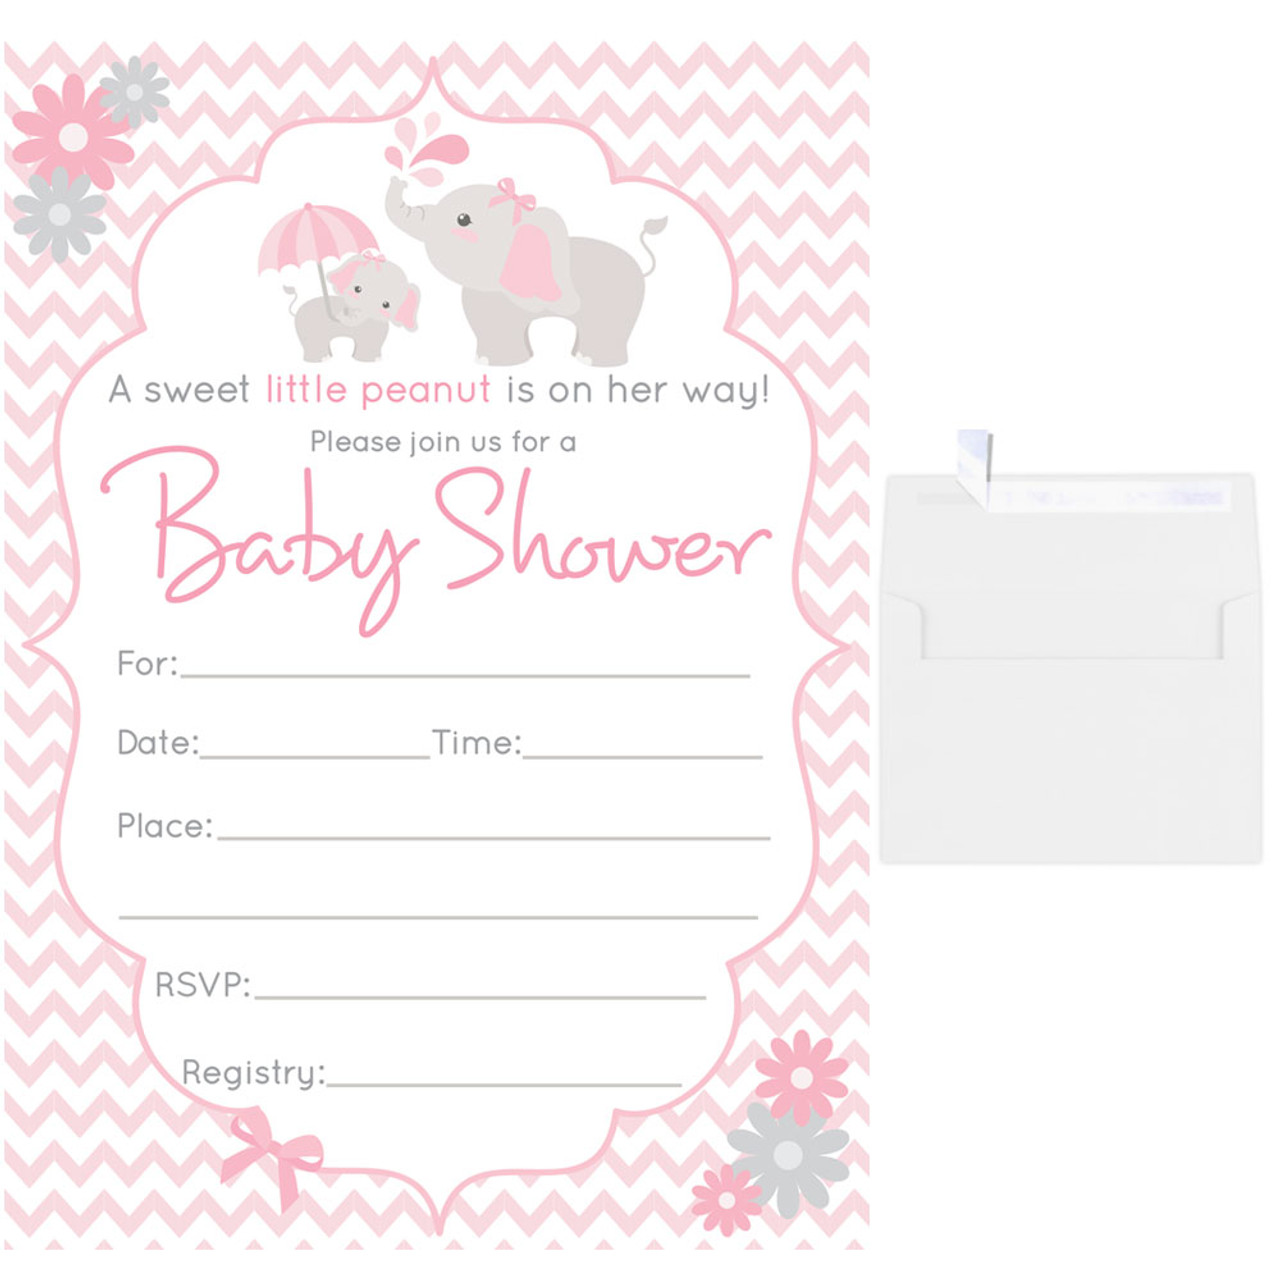 25 Fill in Blank Baby Shower Invitations w/ Envelopes Pink Elephant